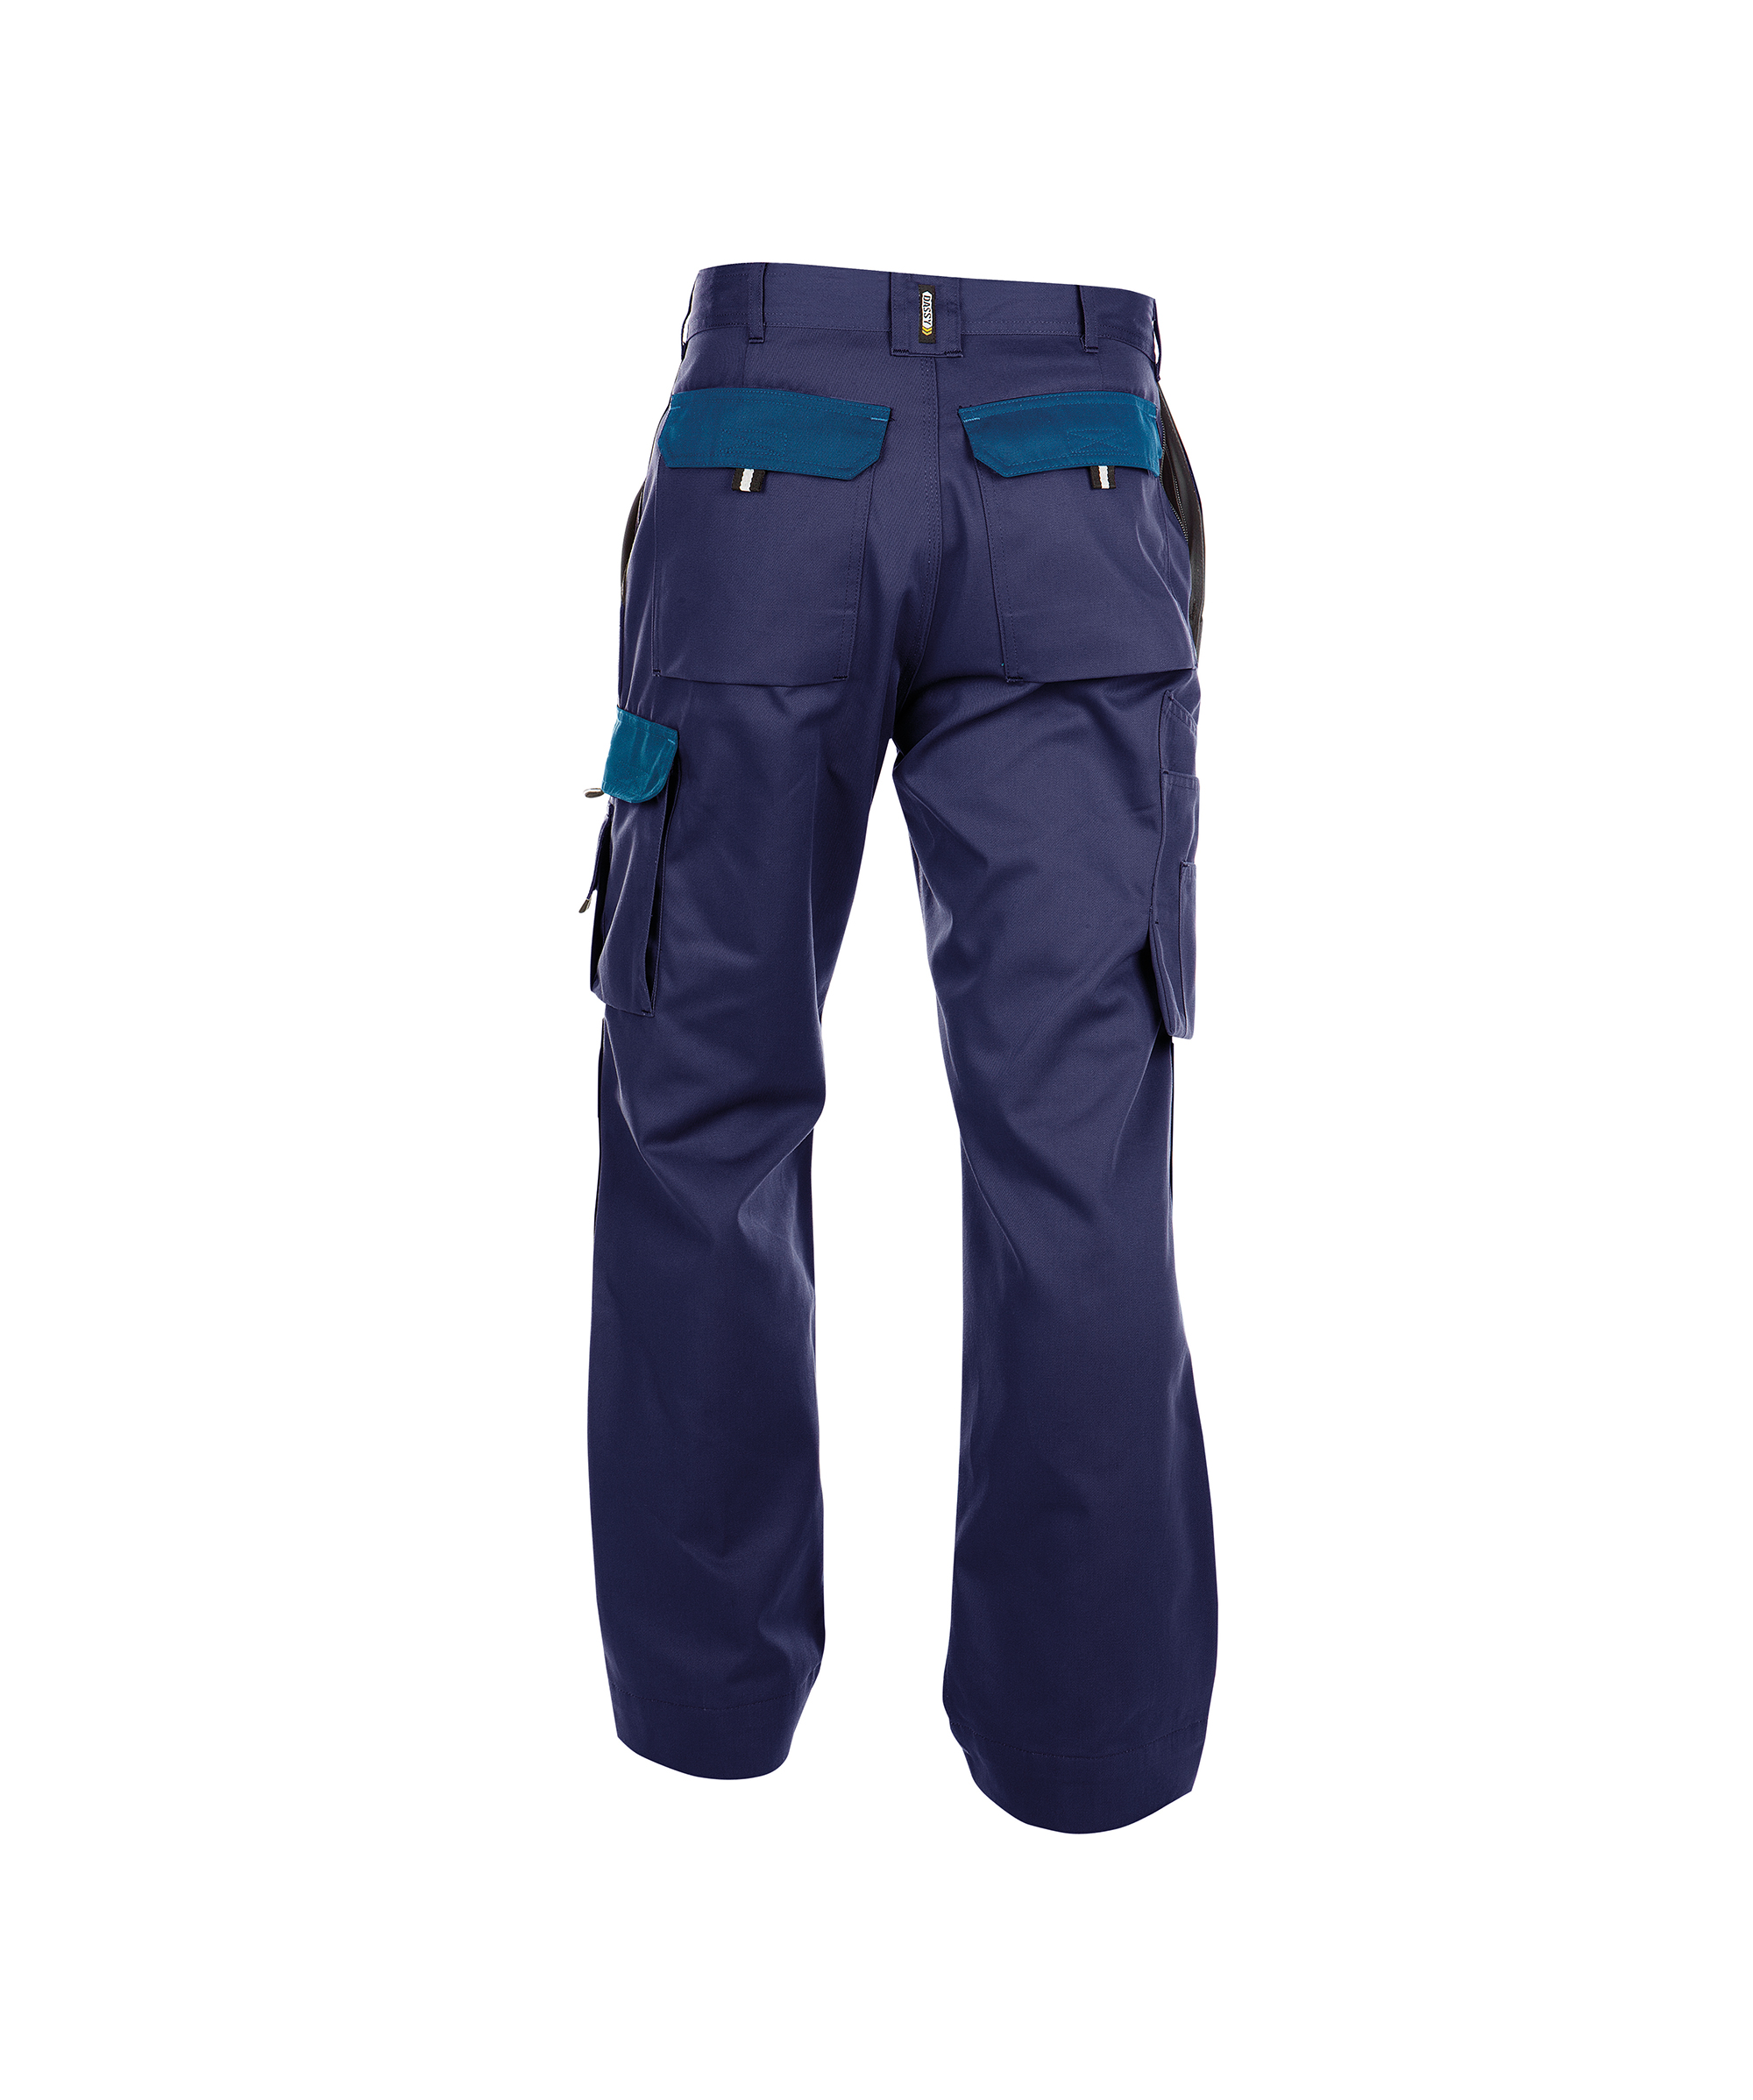 boston_two-tone-work-trousers-with-knee-pockets_navy-royal-blue_back.jpg